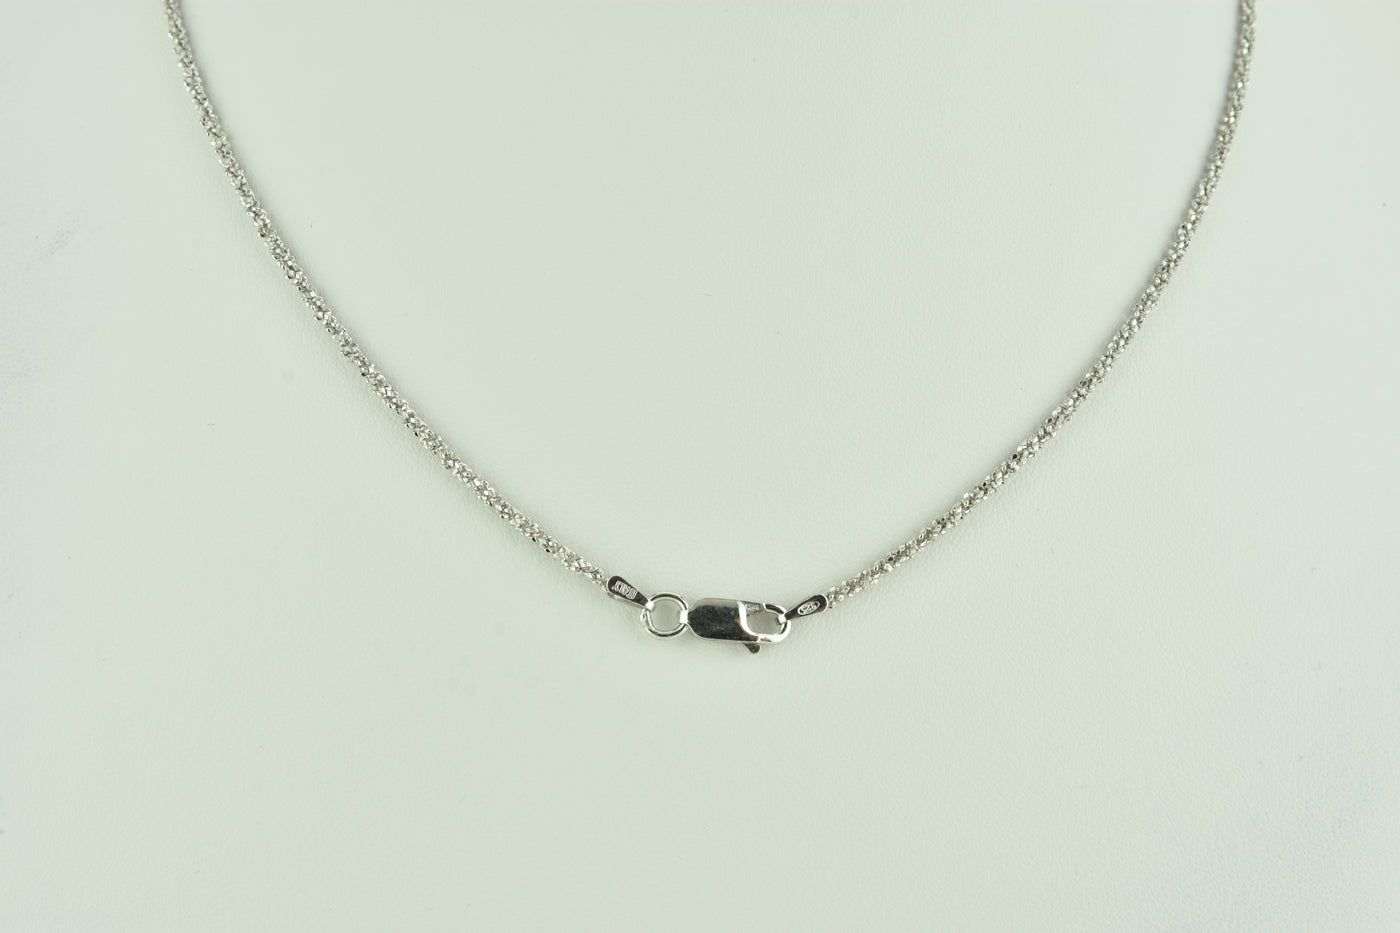 Diamond Cut Twisted Sterling Silver Chain with White Rhodium Plate